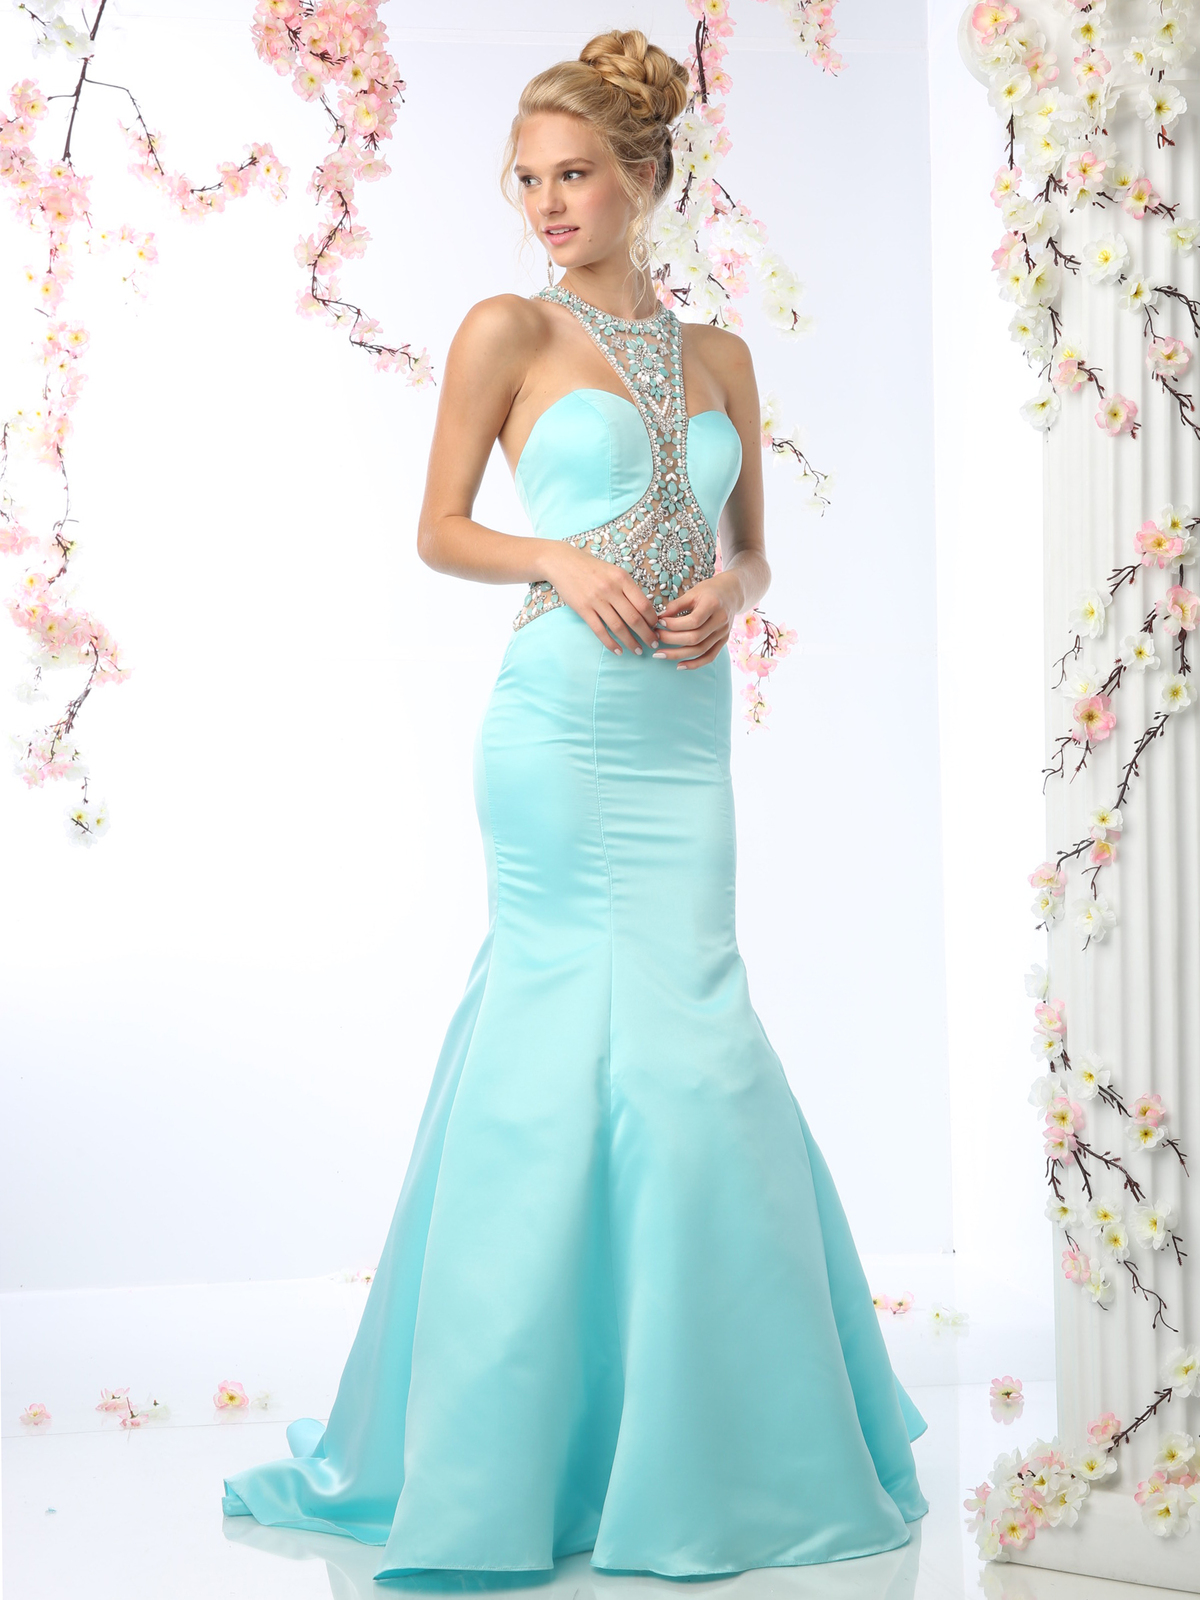 Embellished Halter Prom Evening Dress with Mermaid Skirt | Sung